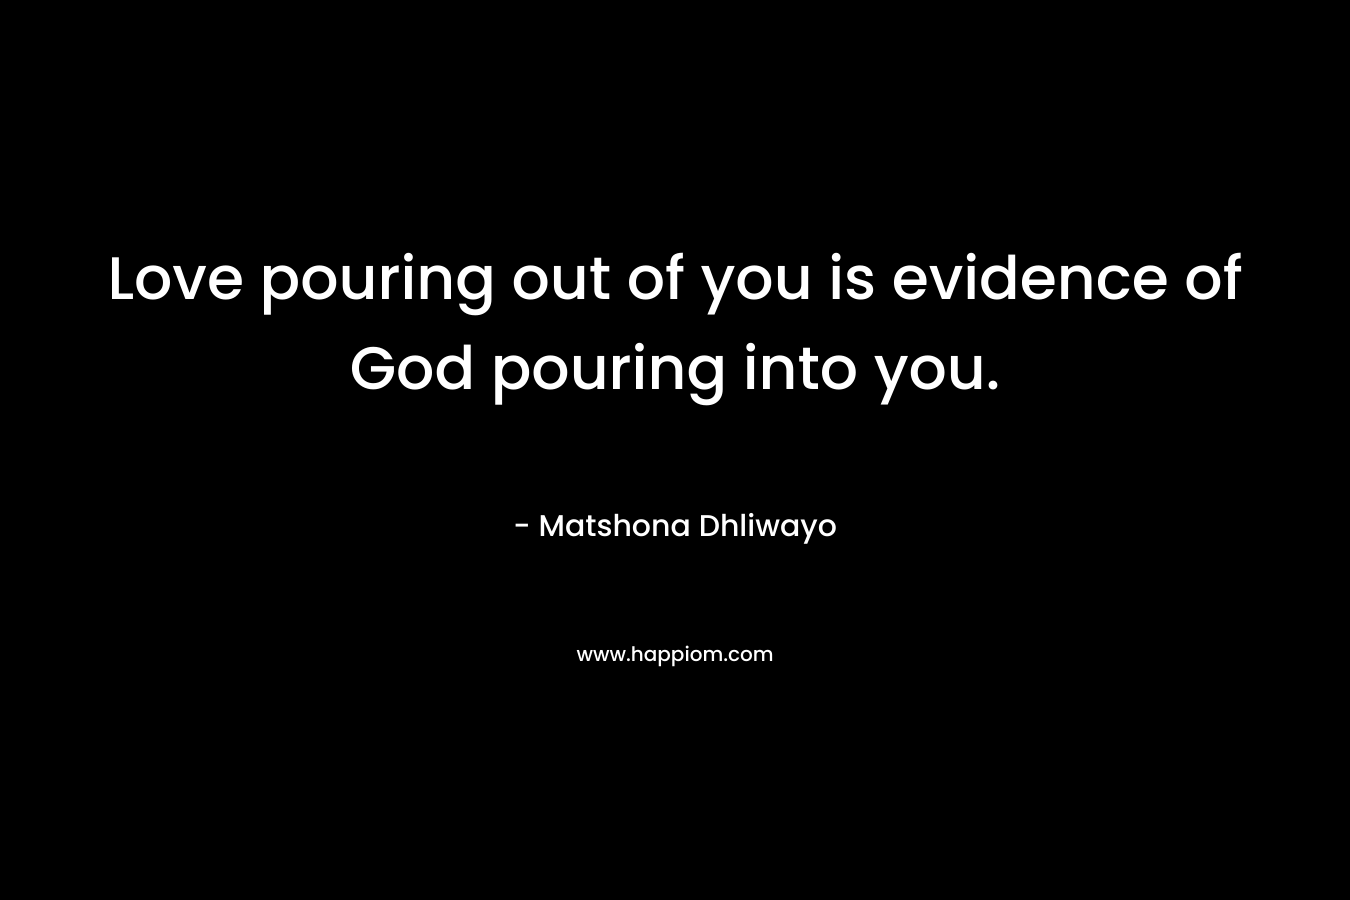 Love pouring out of you is evidence of God pouring into you. – Matshona Dhliwayo